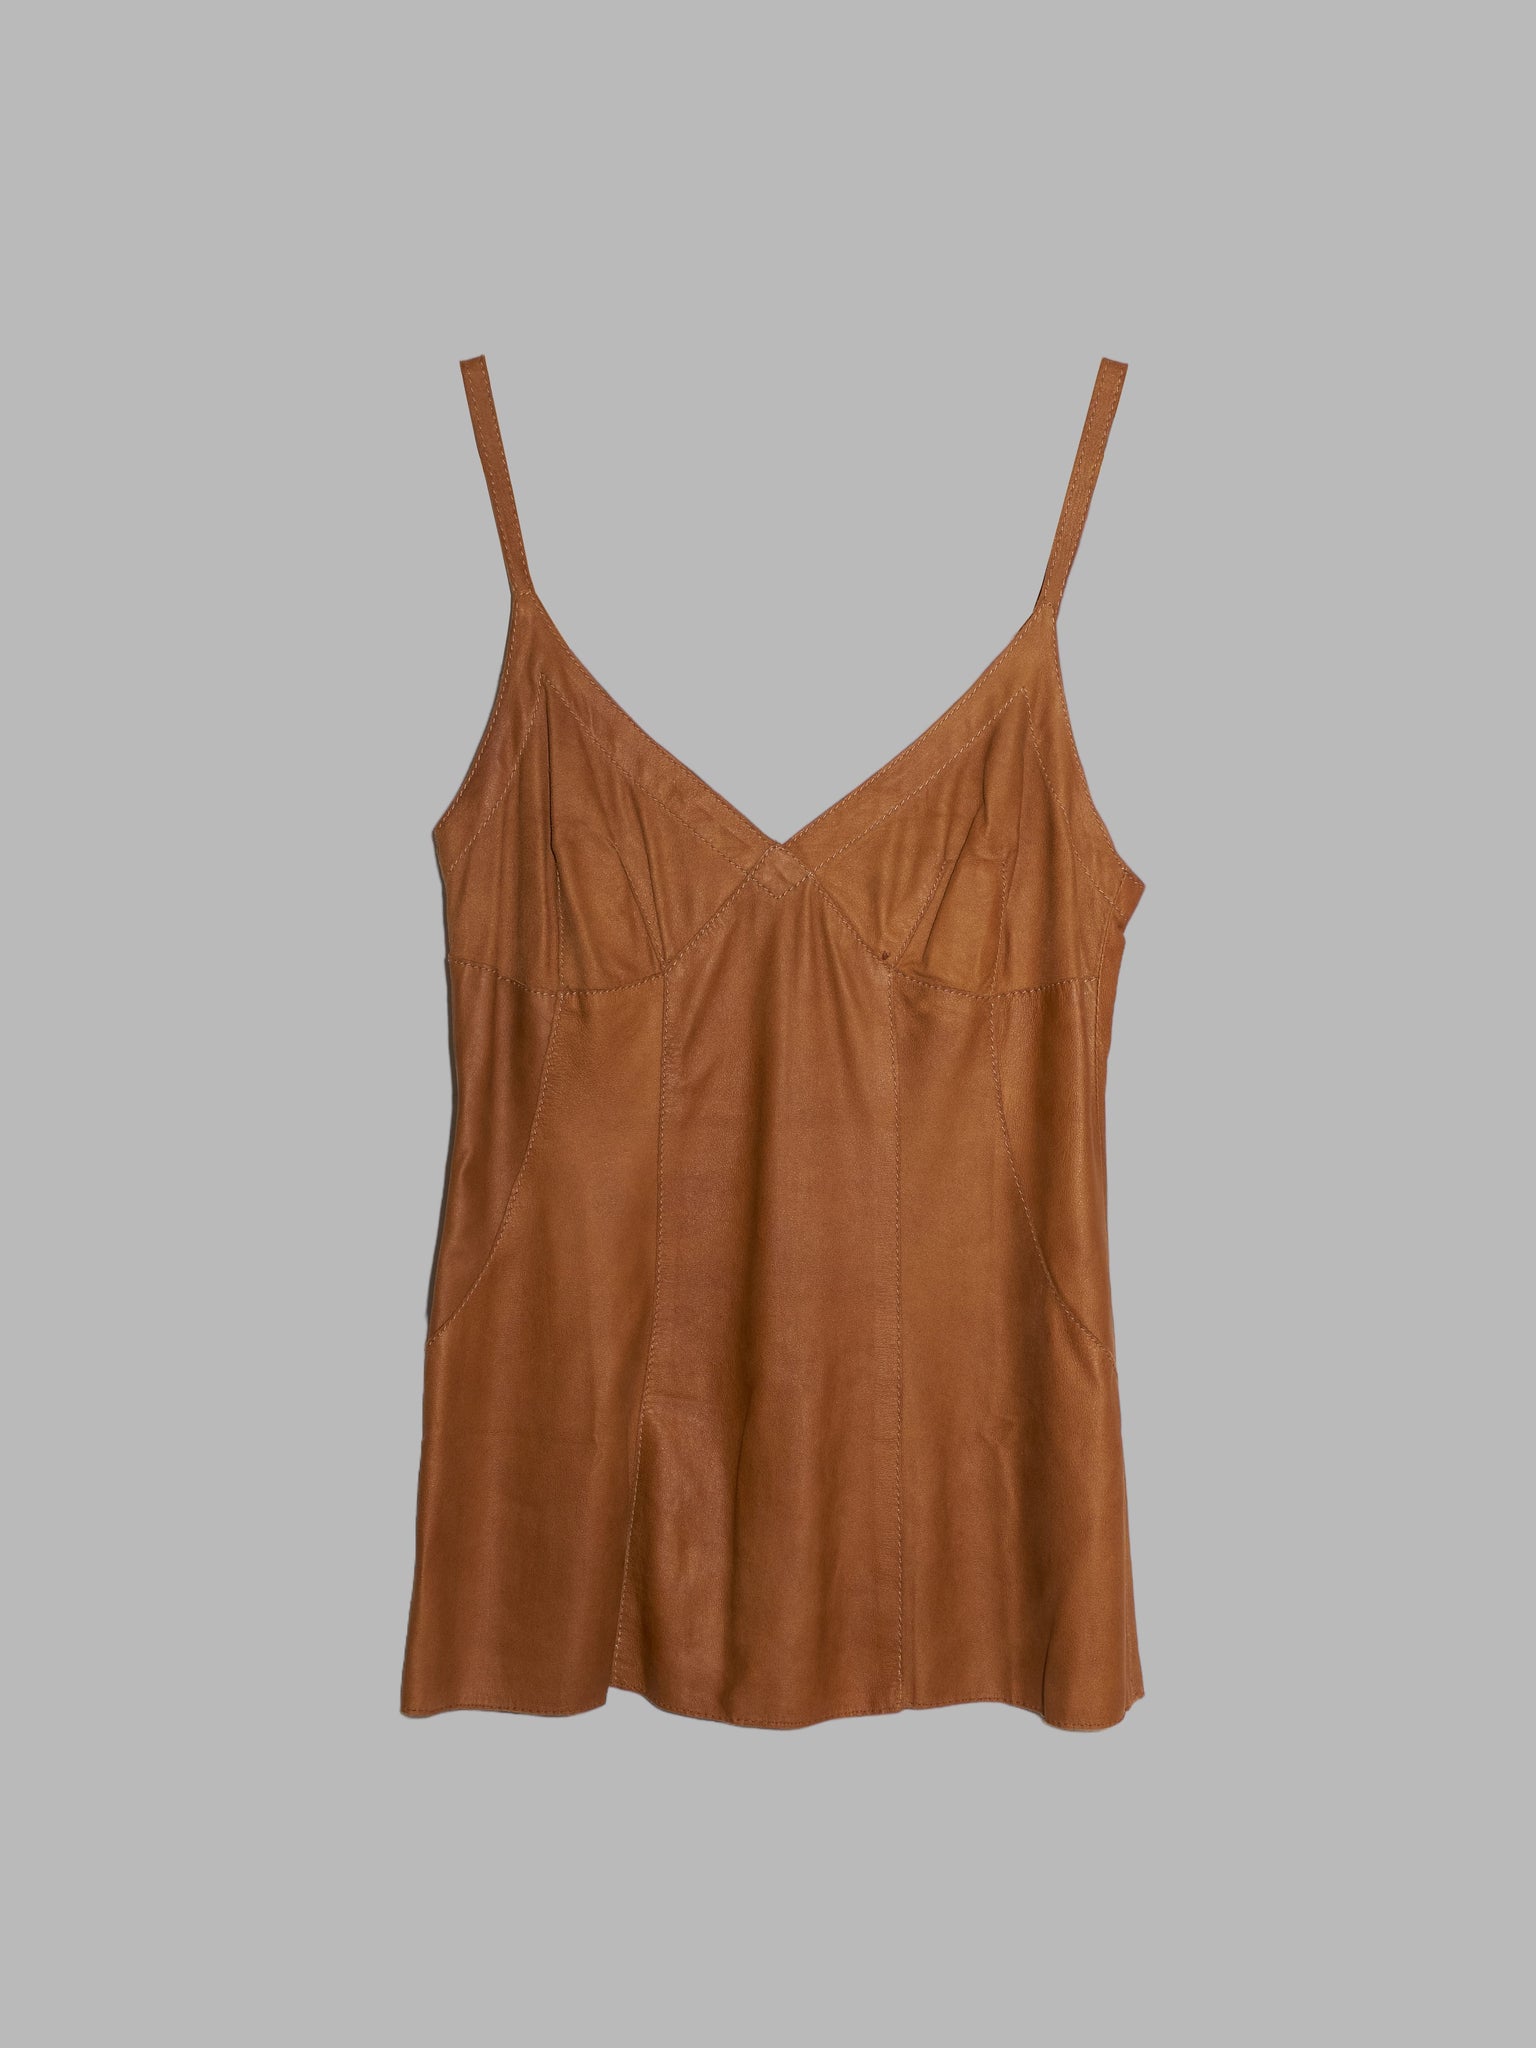 Dirk Bikkembergs 1990s 2000s brown leather bustier top - size 40